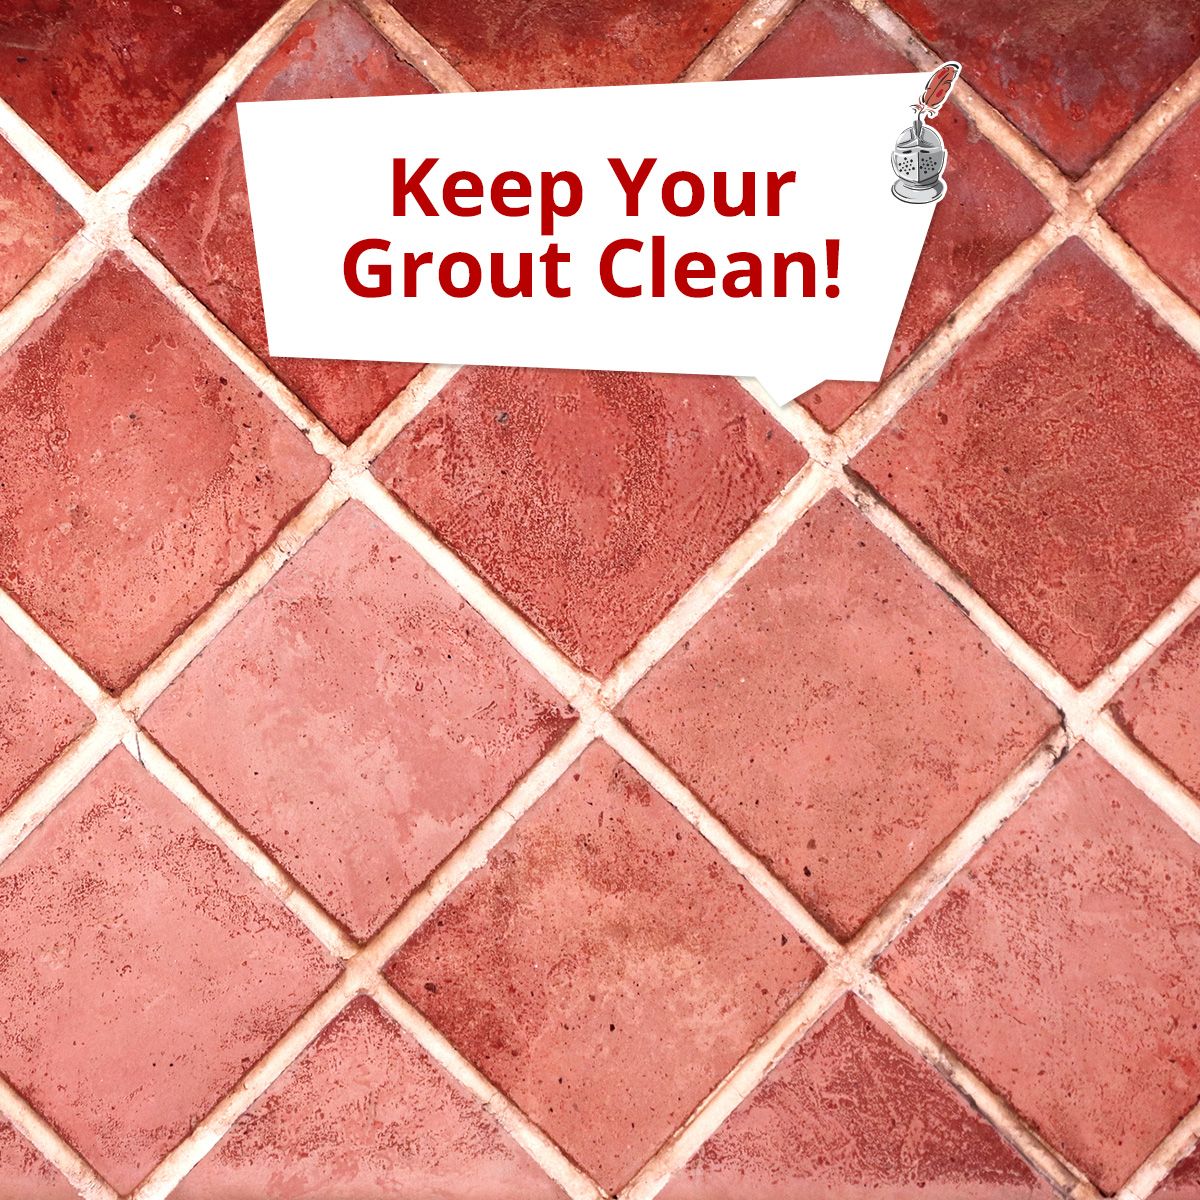 Keep Your Grout Clean!